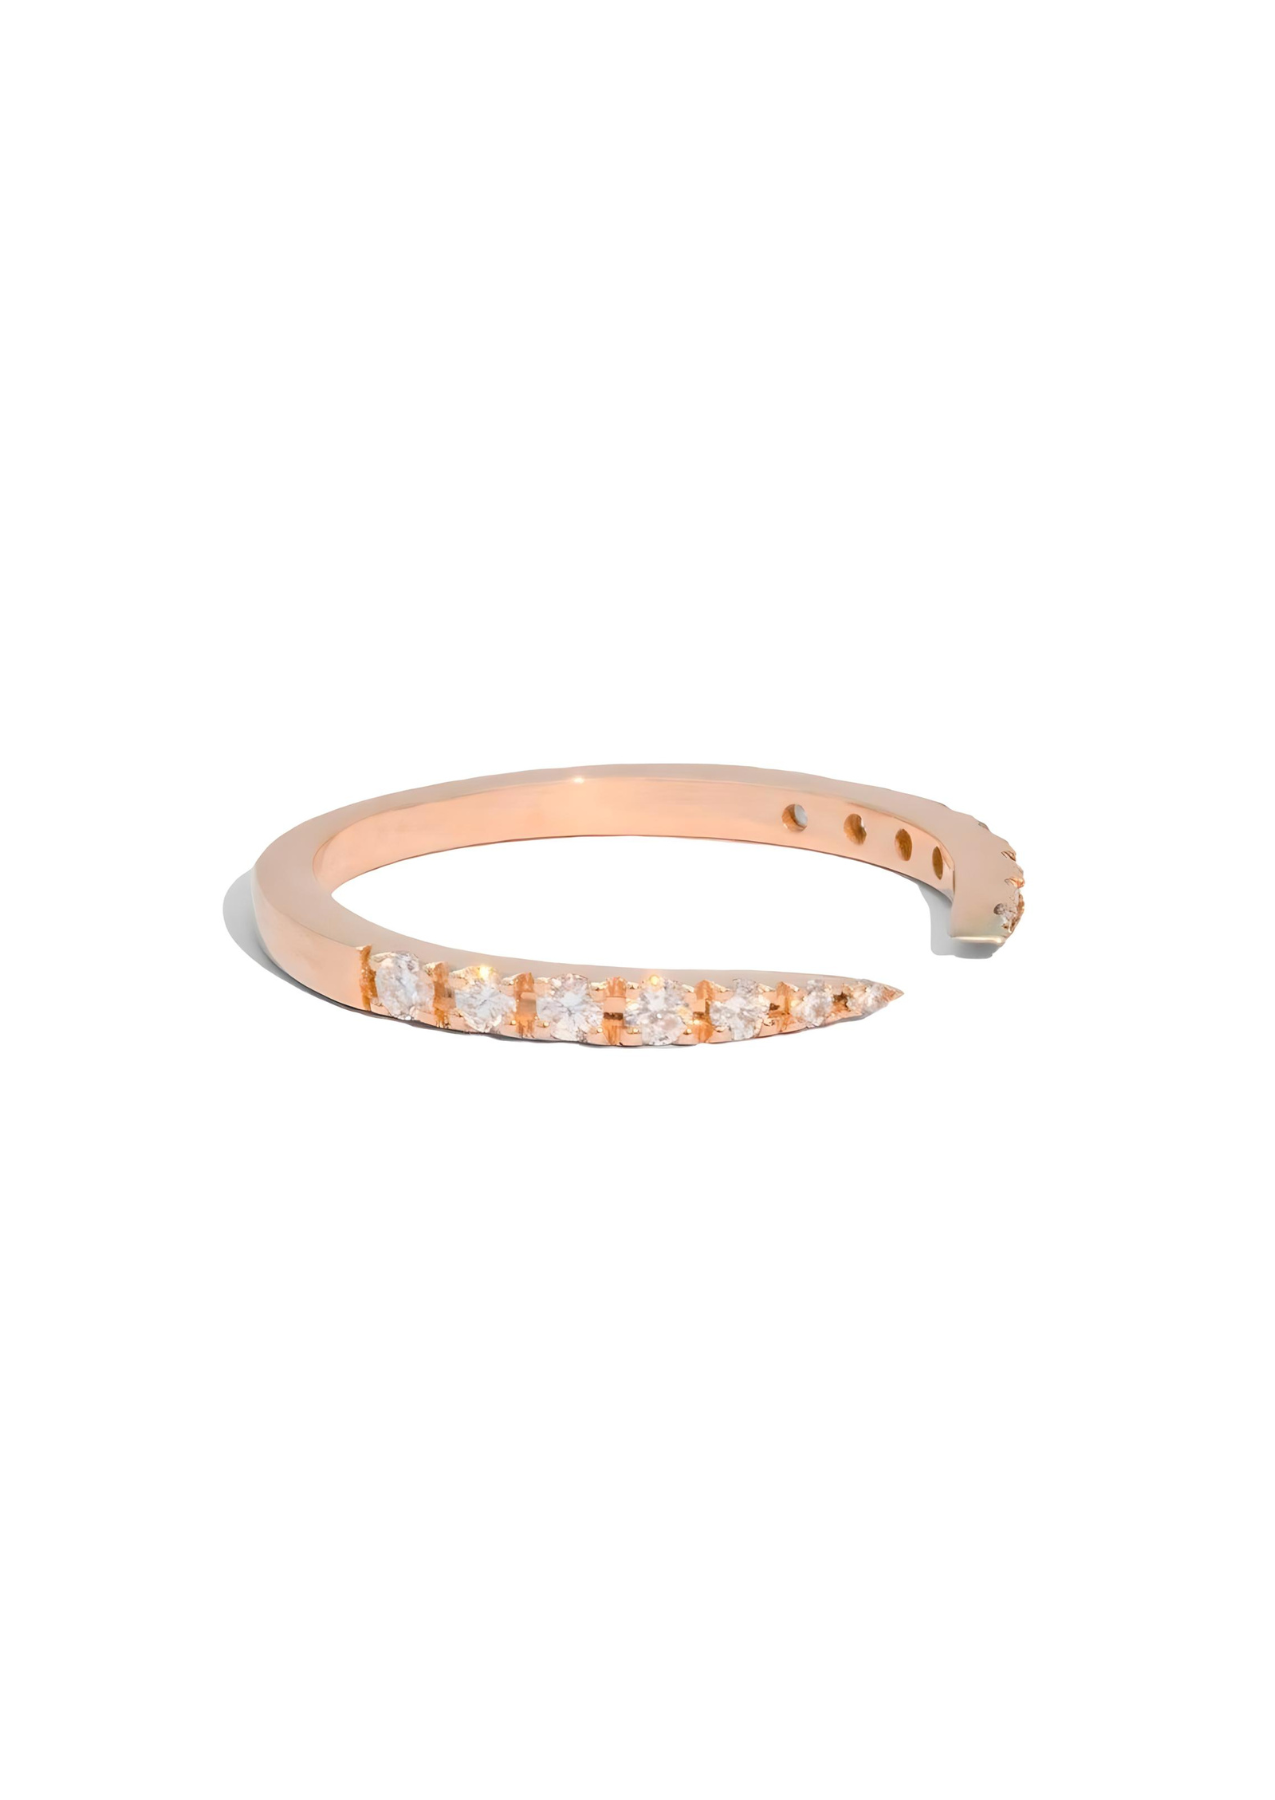 The Diamond Open Solid Gold Band